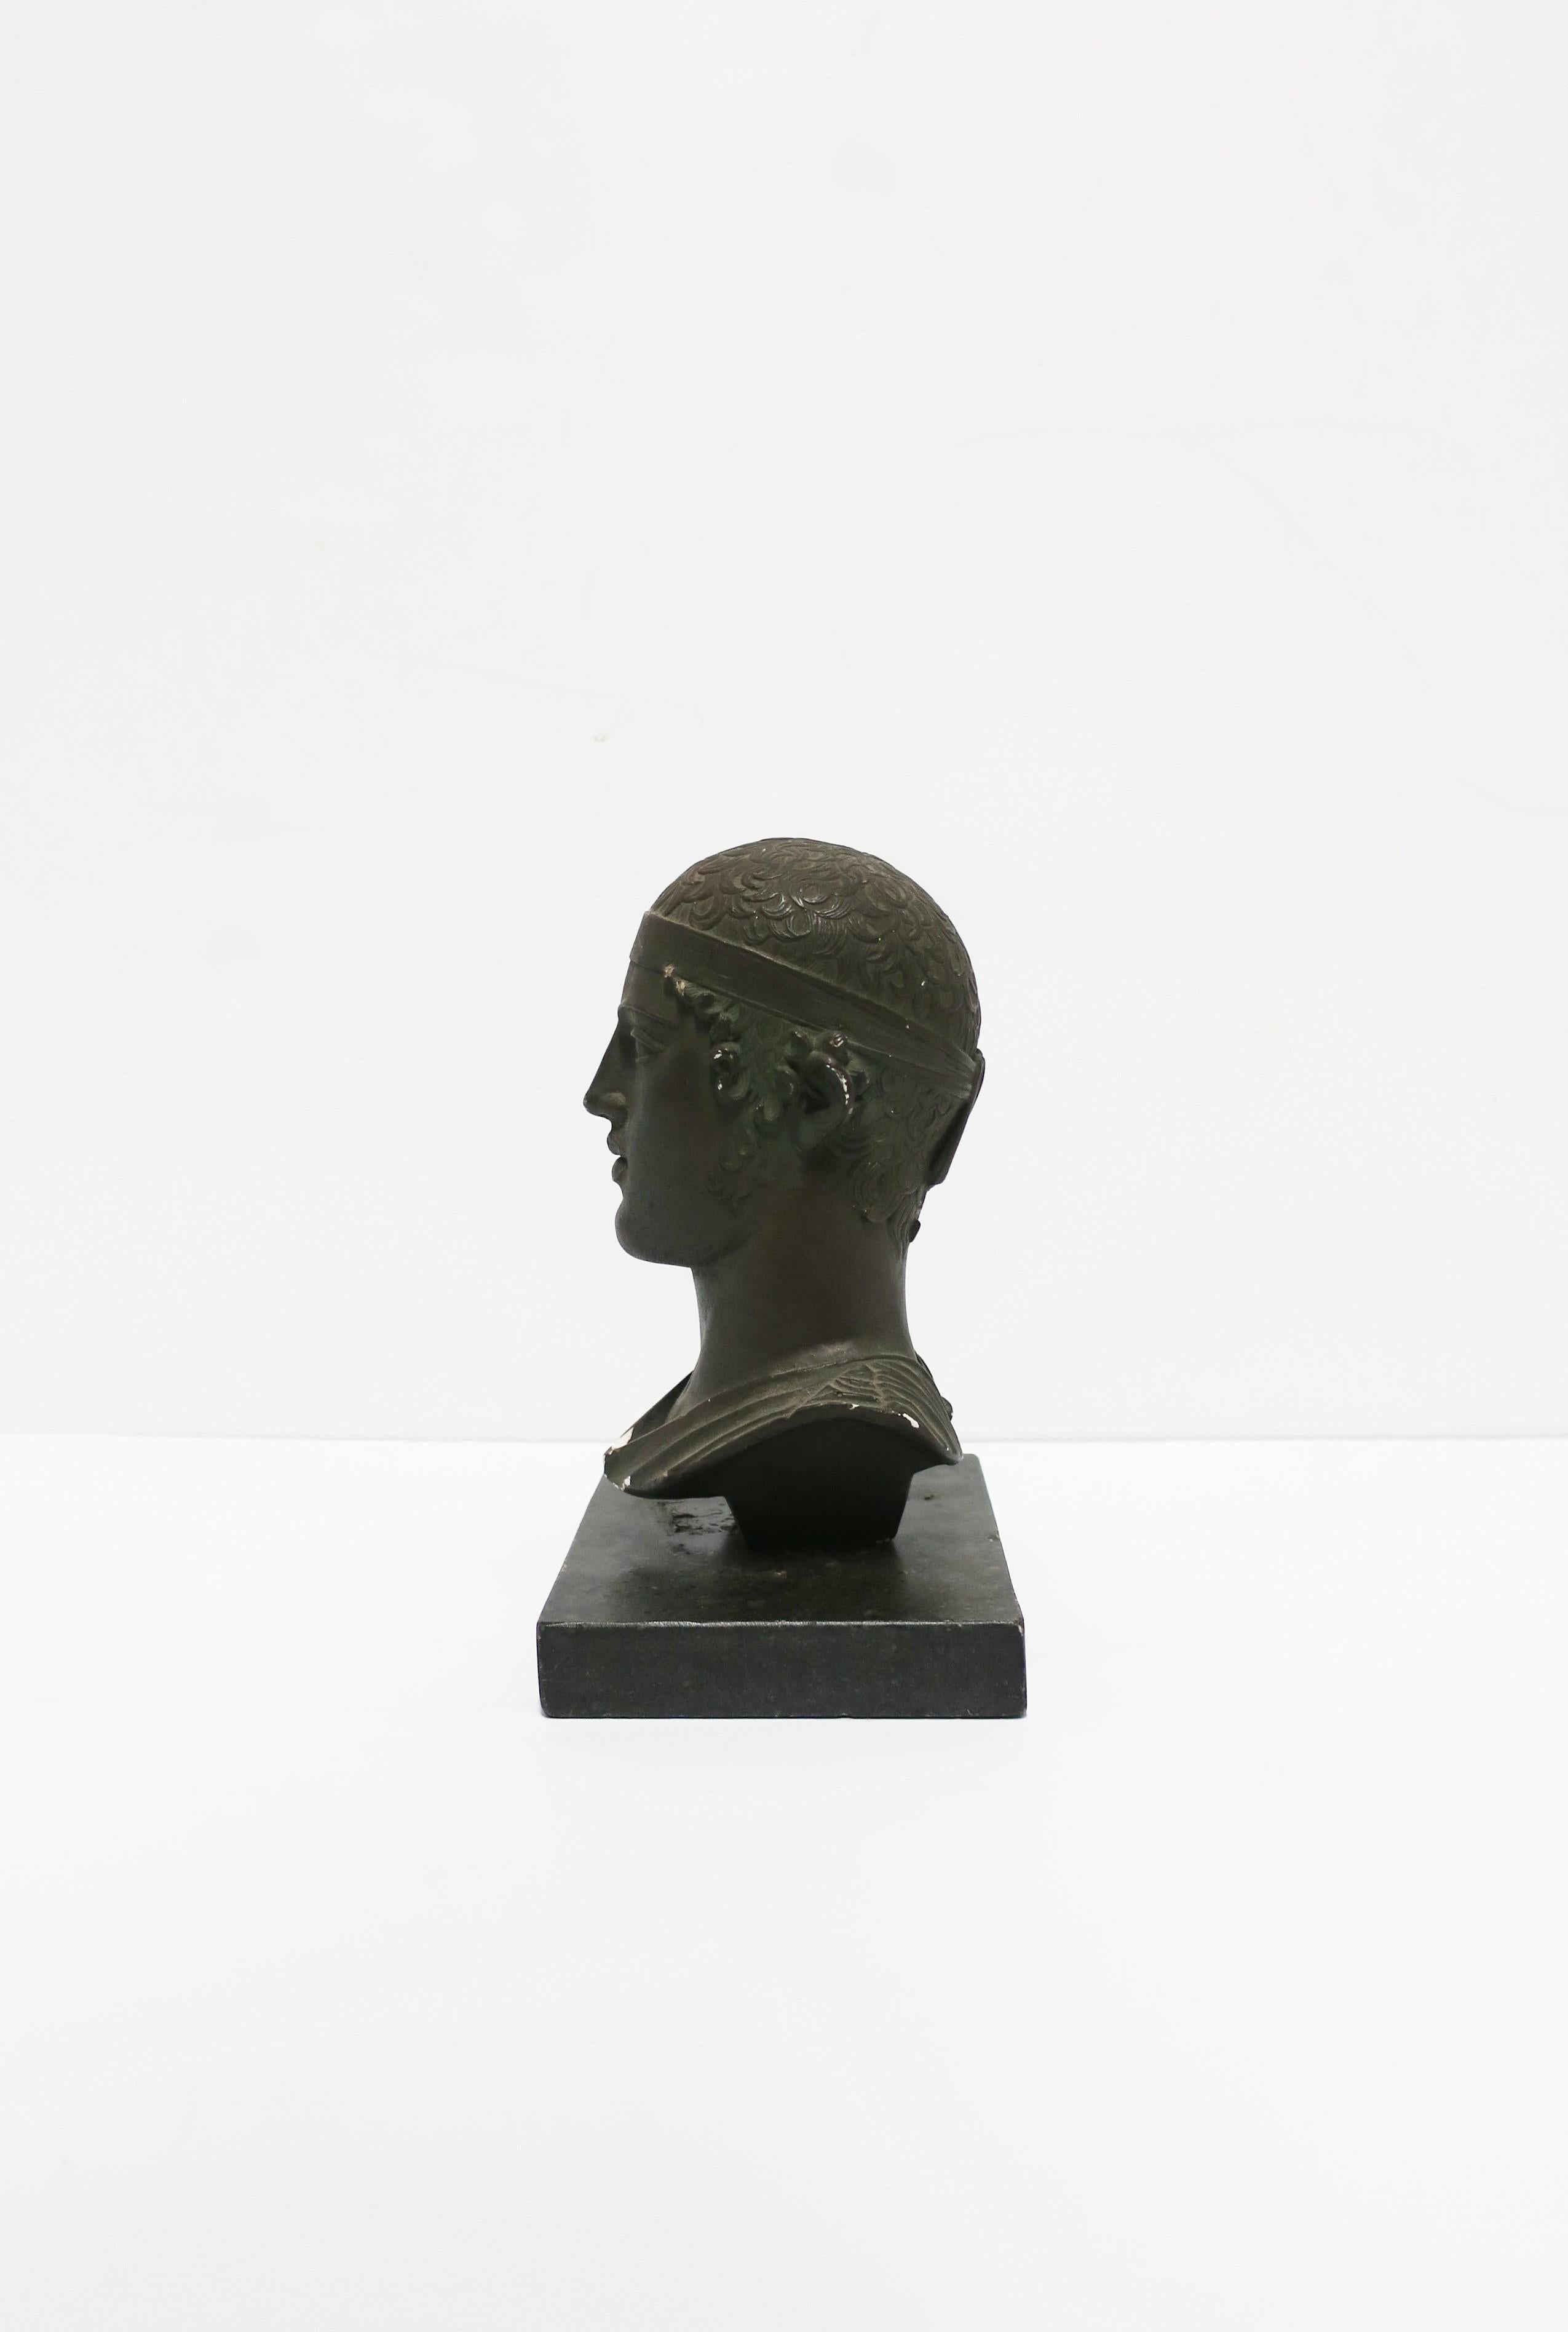 English Greek or Roman Head Bust Sculpture, 1965 For Sale